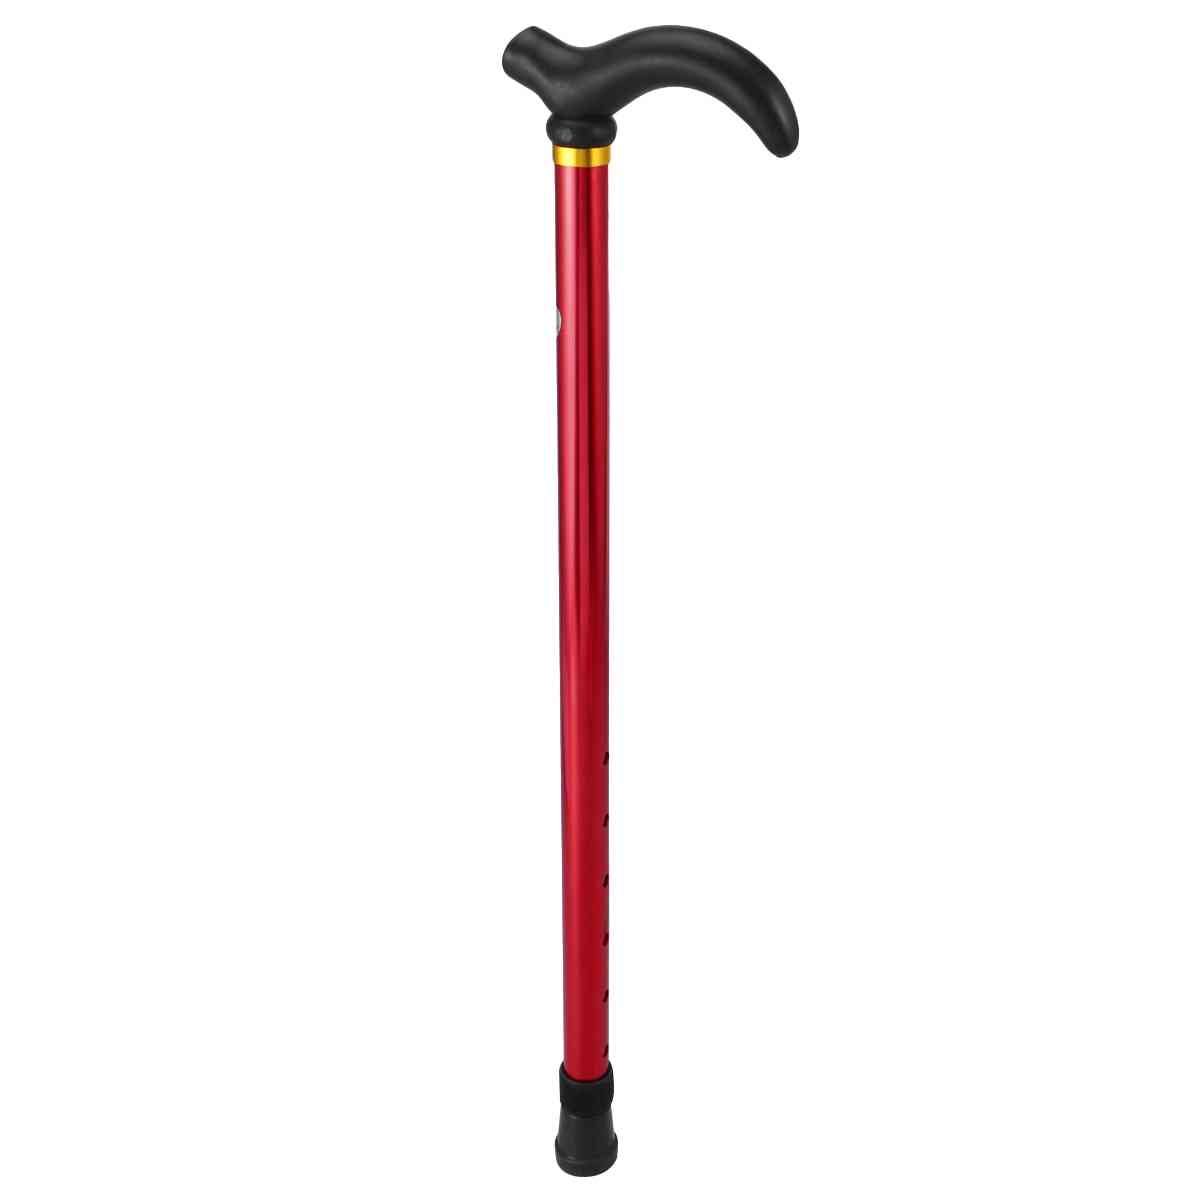 Retractable 2 Section Adjustable Telescopic Height Cane Anti-skid Walking Stick